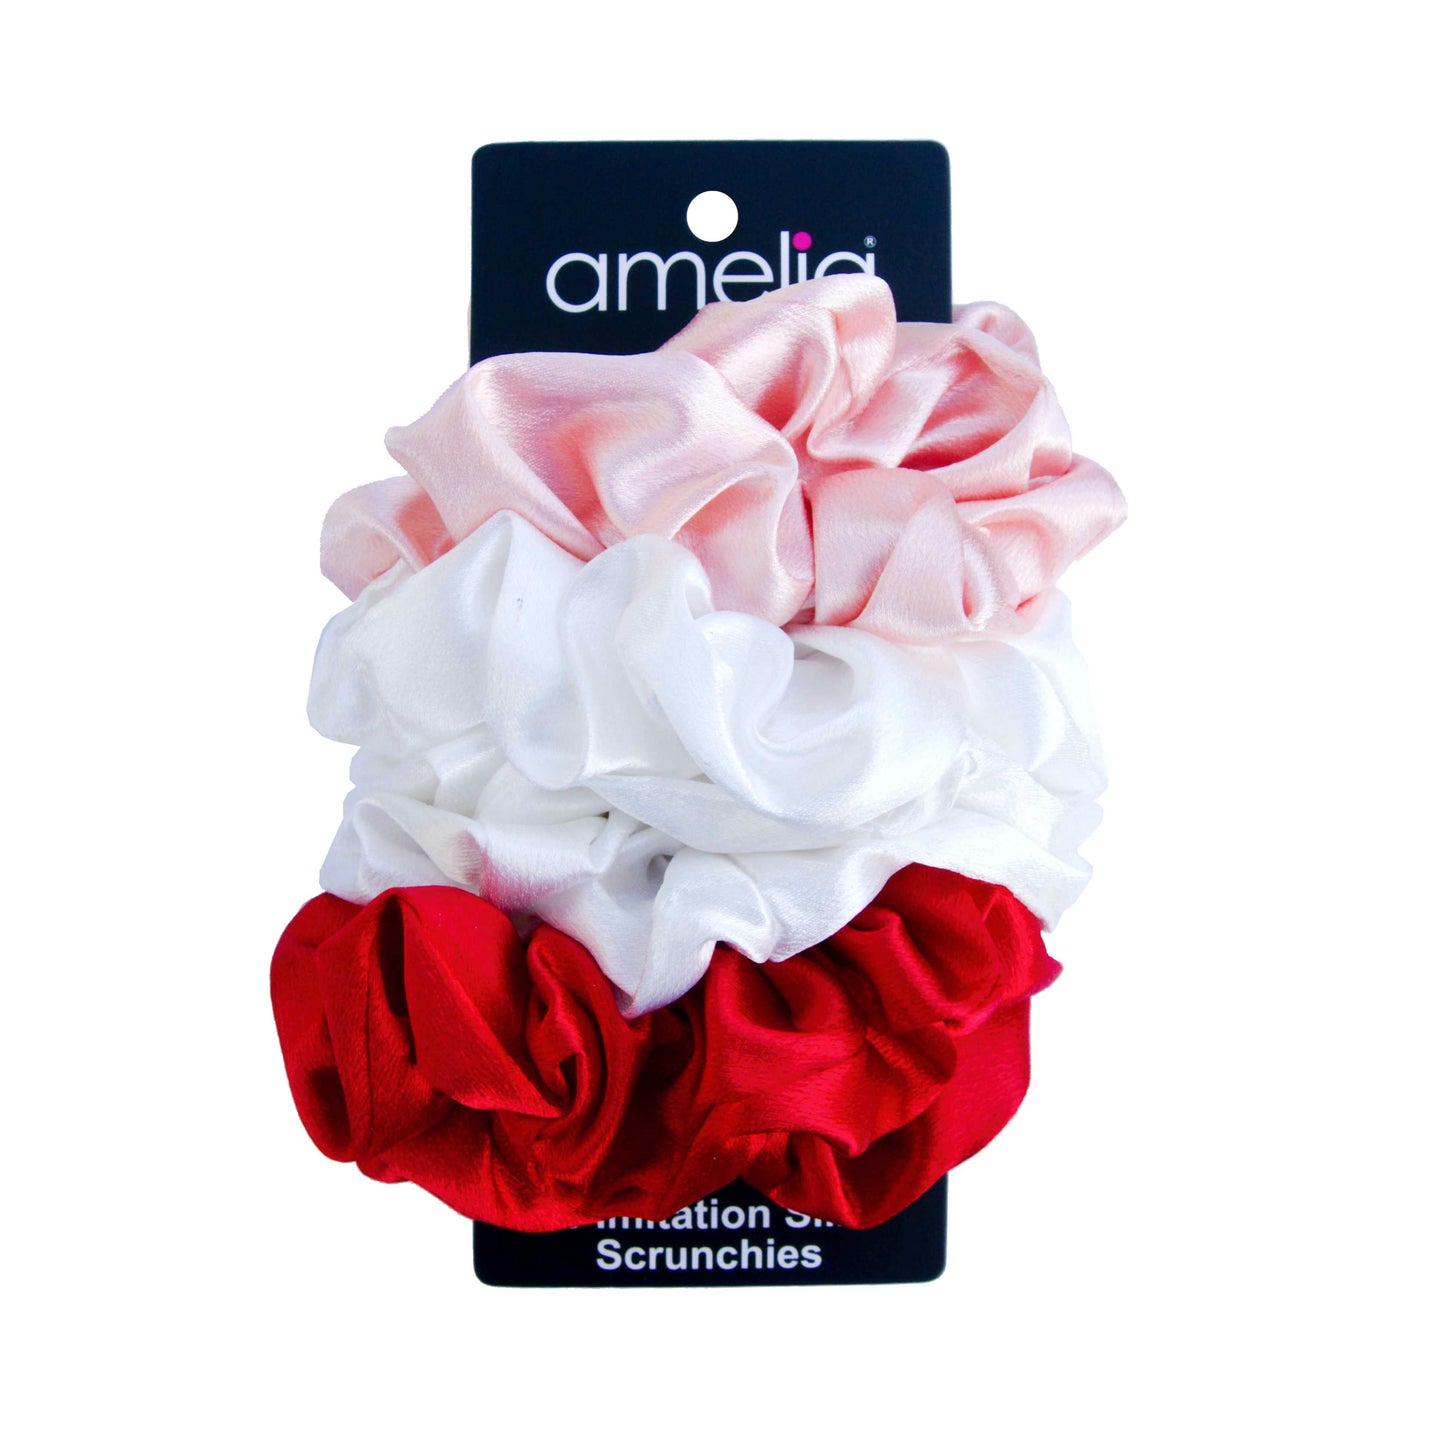 Amelia Beauty Products, Reds Mix Imitation Silk Scrunchies, 4.5in Diameter, Gentle on Hair, Strong Hold, No Snag, No Dents or Creases. 6 Pack